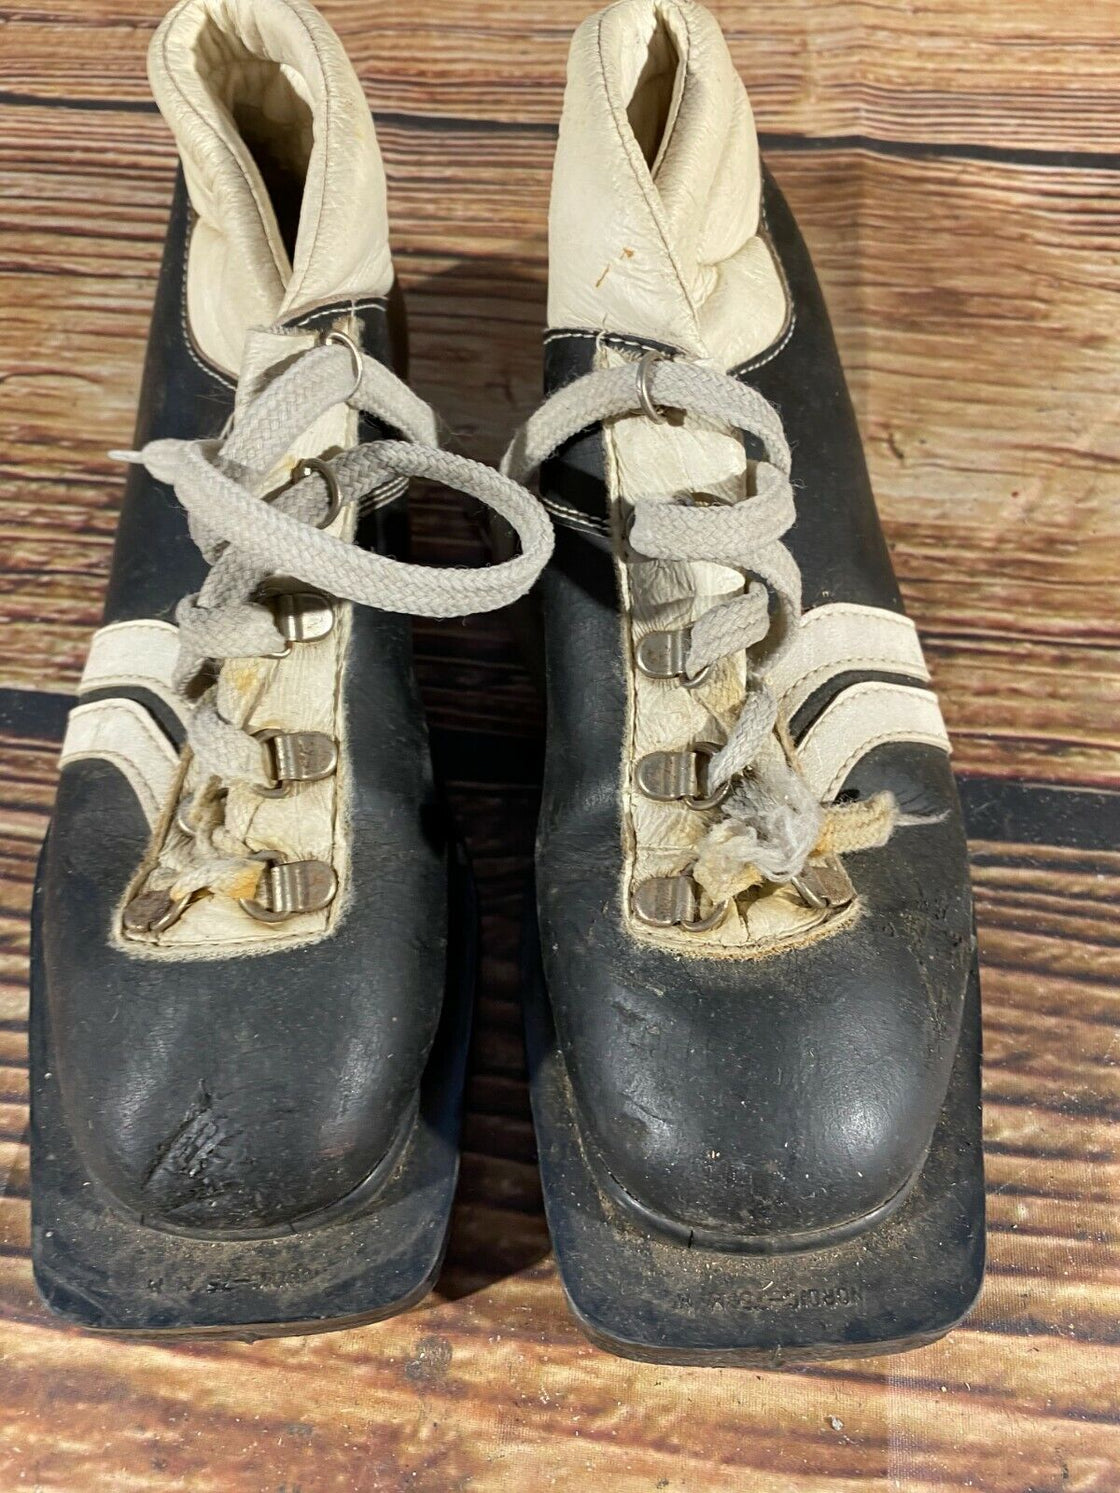 INTERSPORT Vintage Nordic Cross Country Ski Boots EU38 US5.5 for NN 75mm 3pin